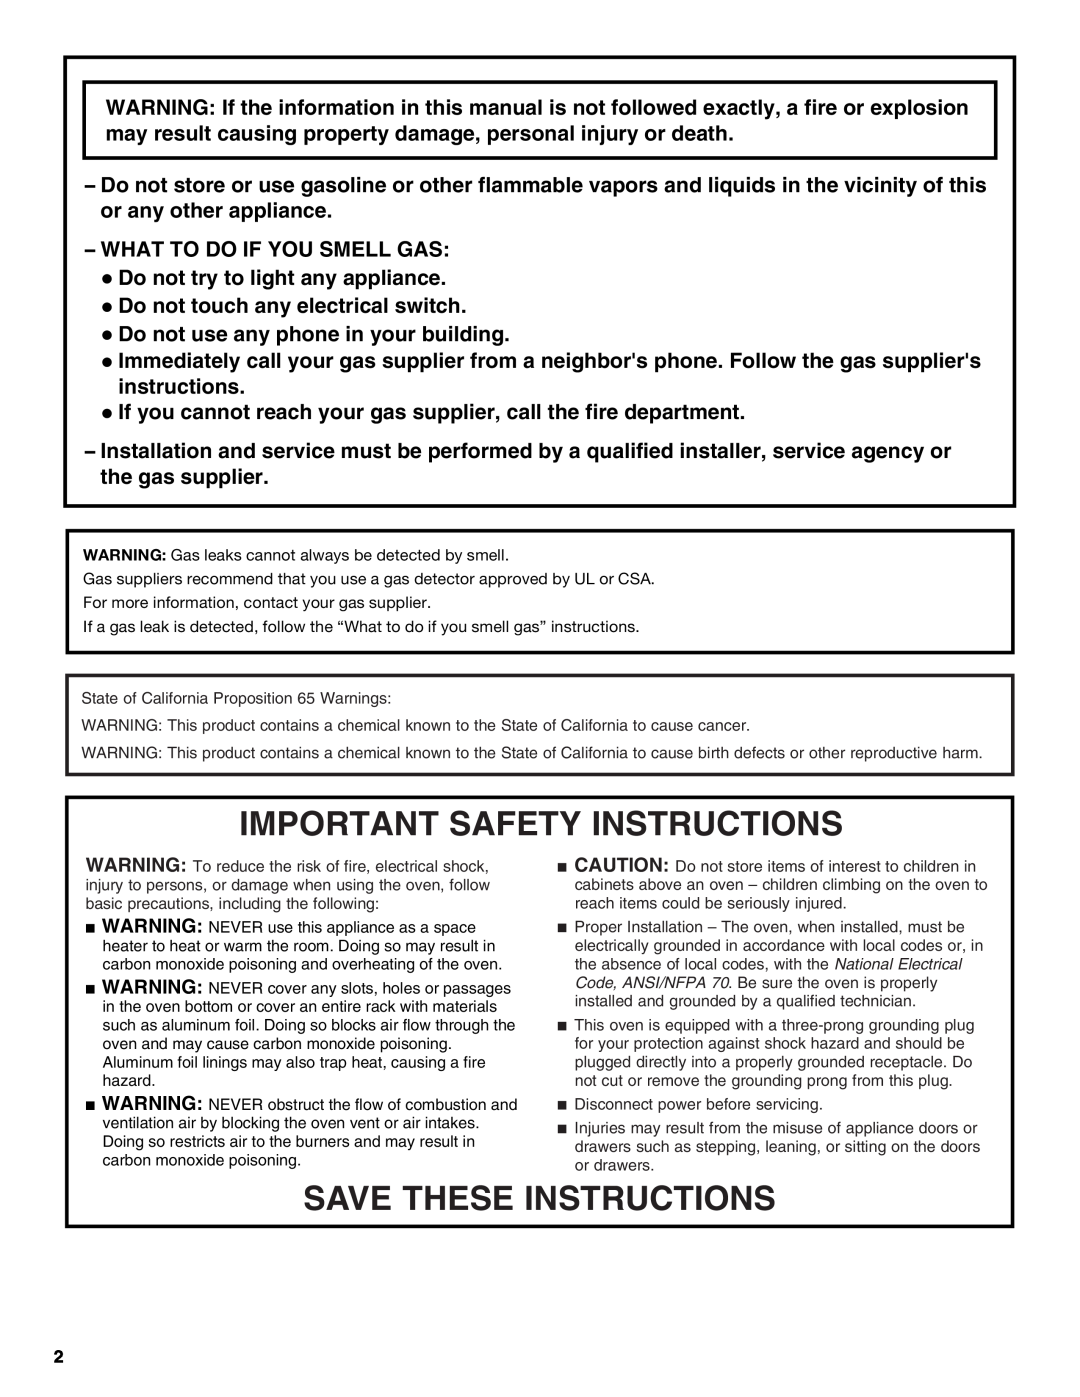 Maytag W10203503B, CWG3600AA warranty Important Safety Instructions, Save These Instructions 